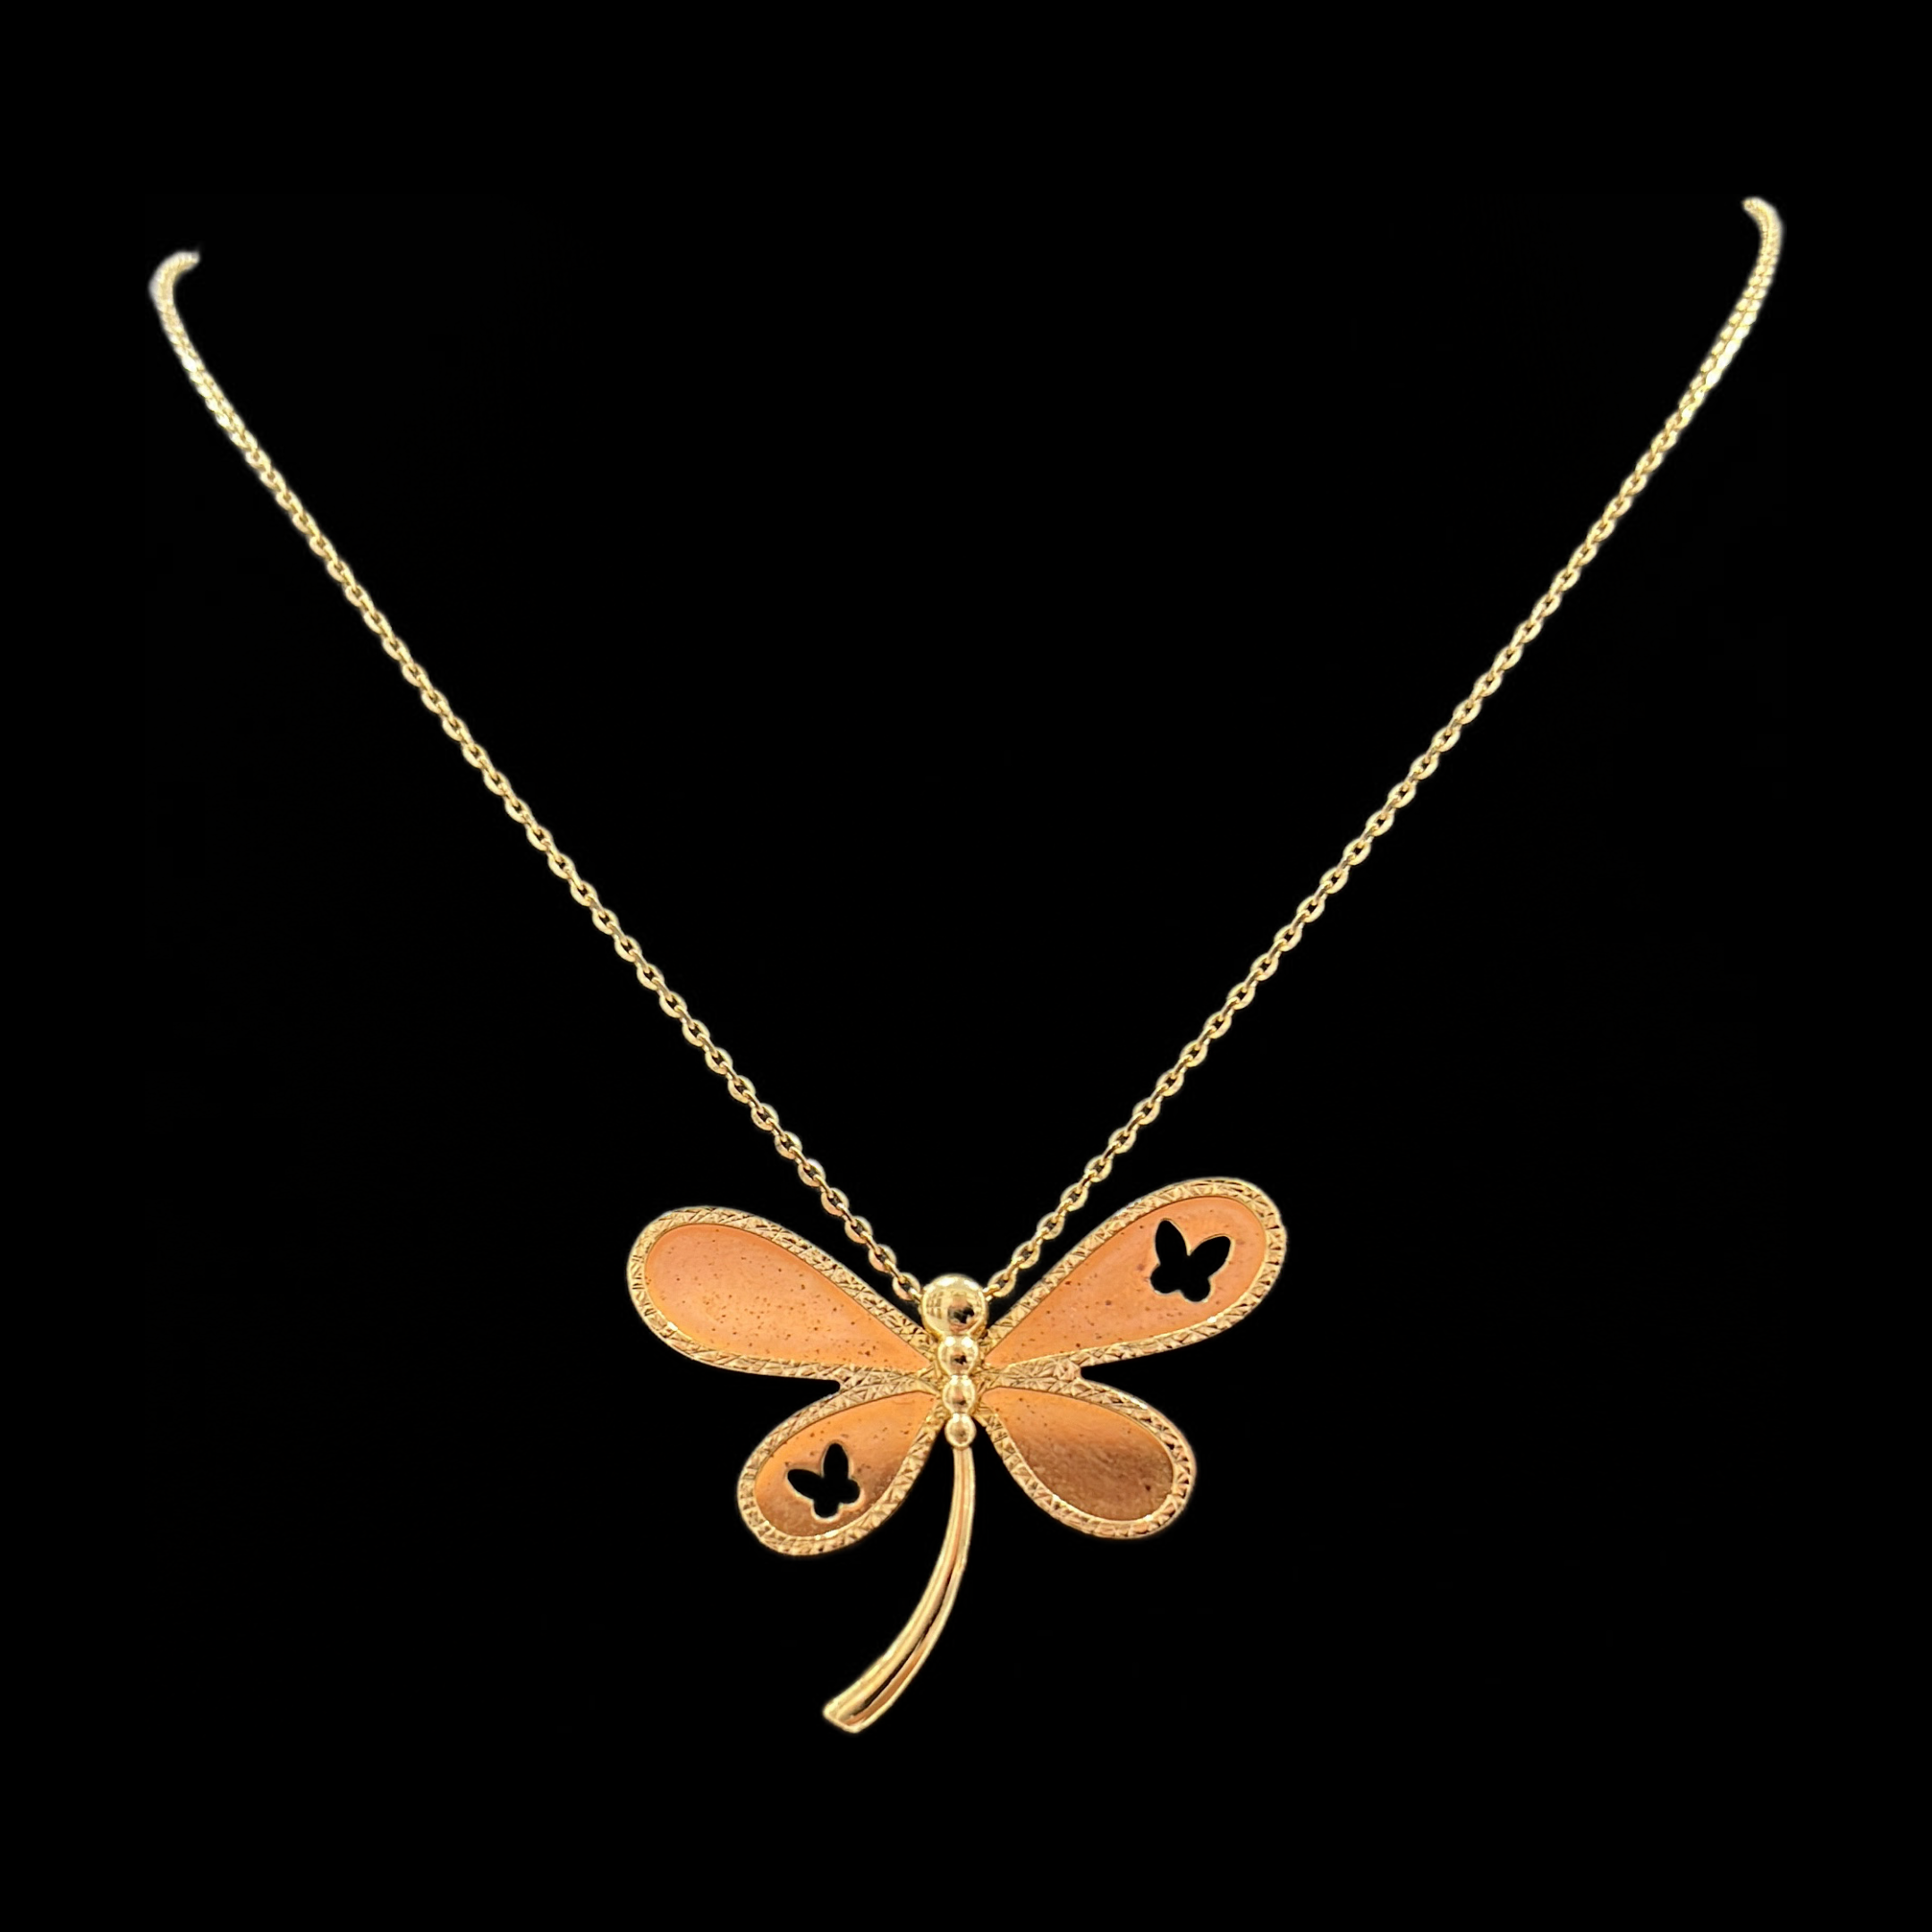 Dragonfly Women's Necklace